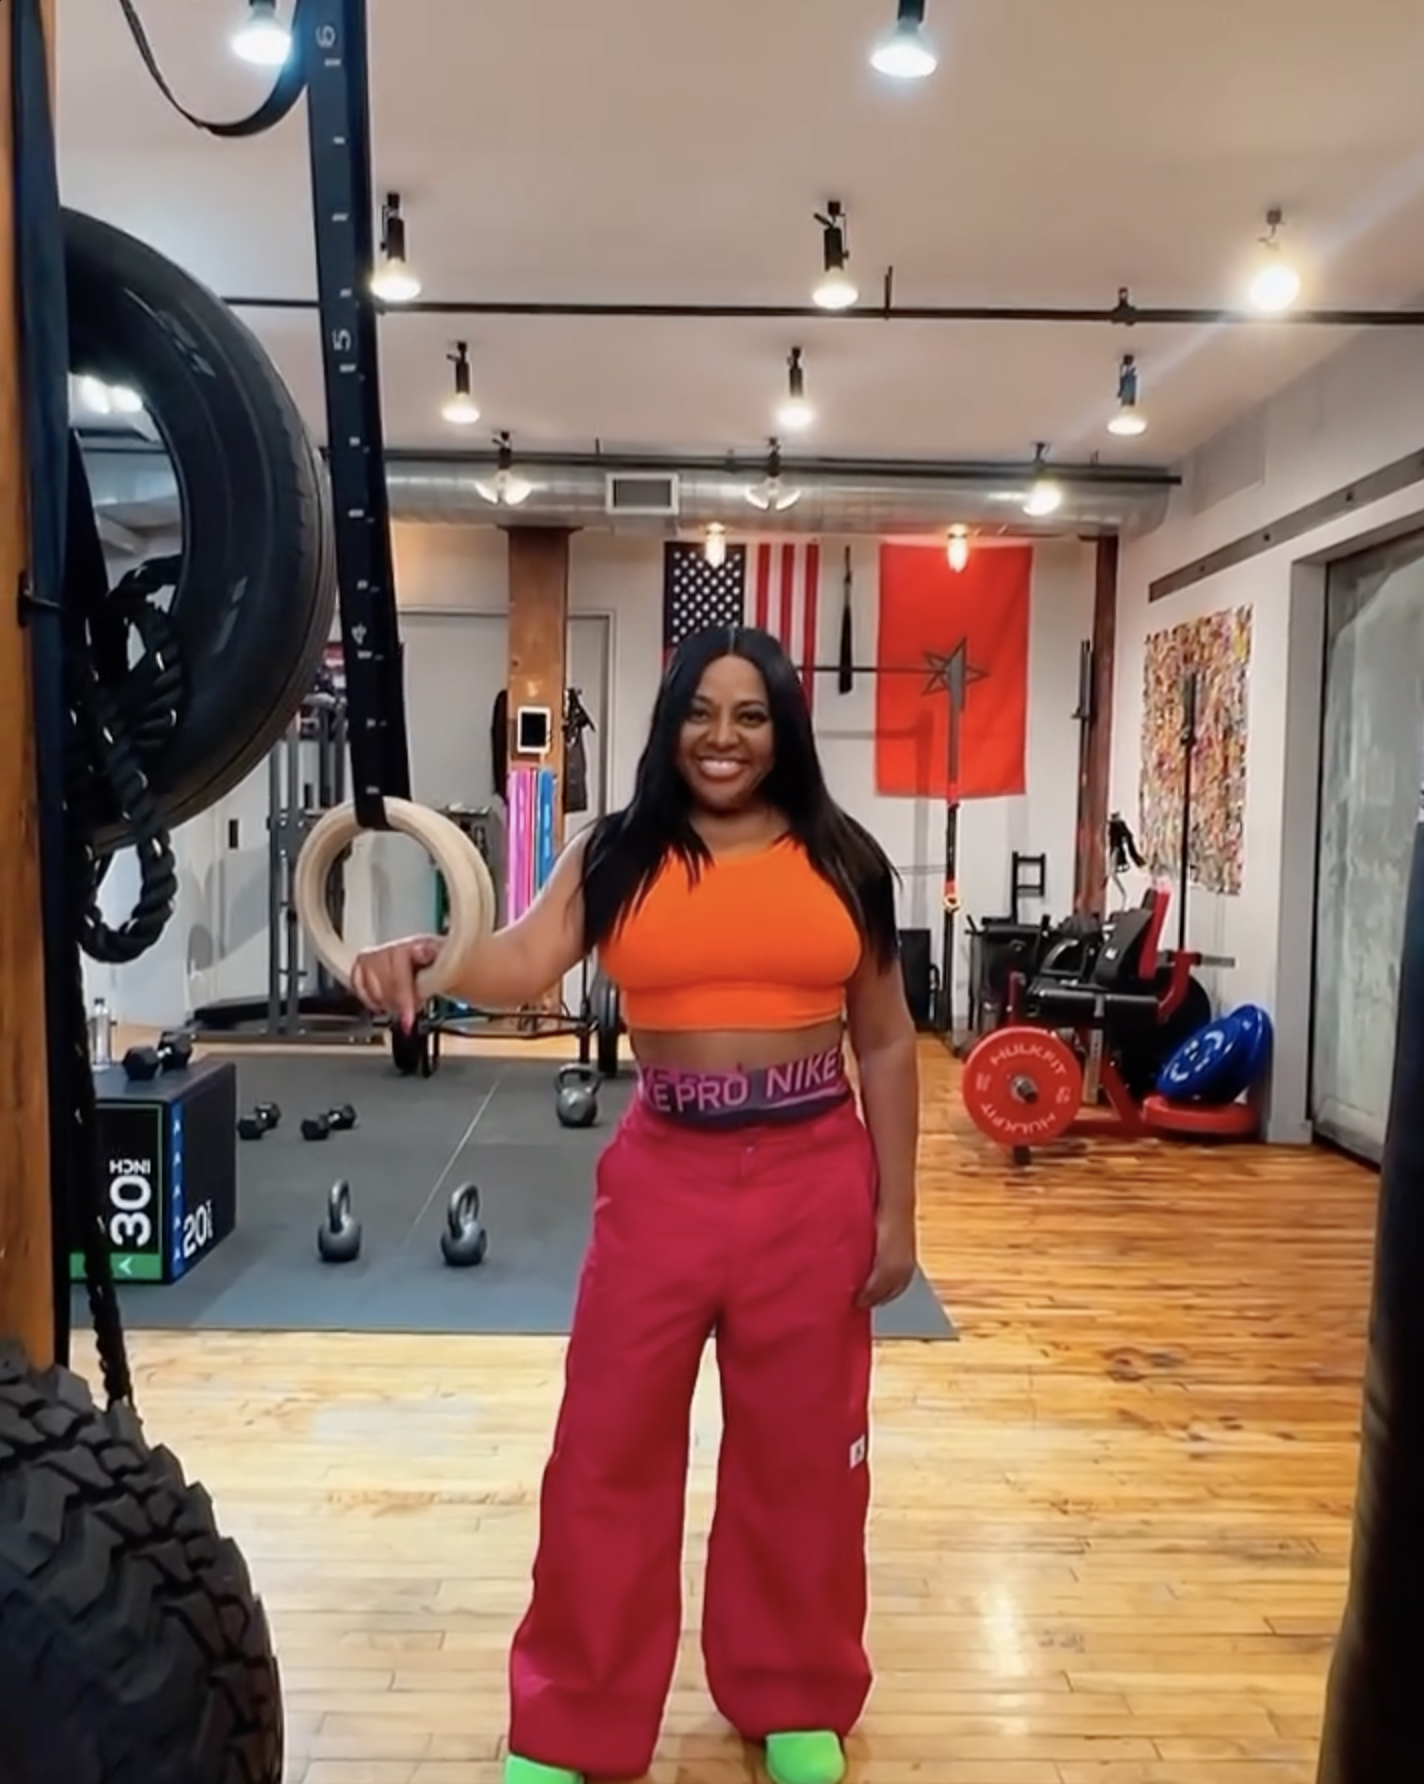 Sherri lost 46 pounds in 2020, and has been keeping the pounds off ever since